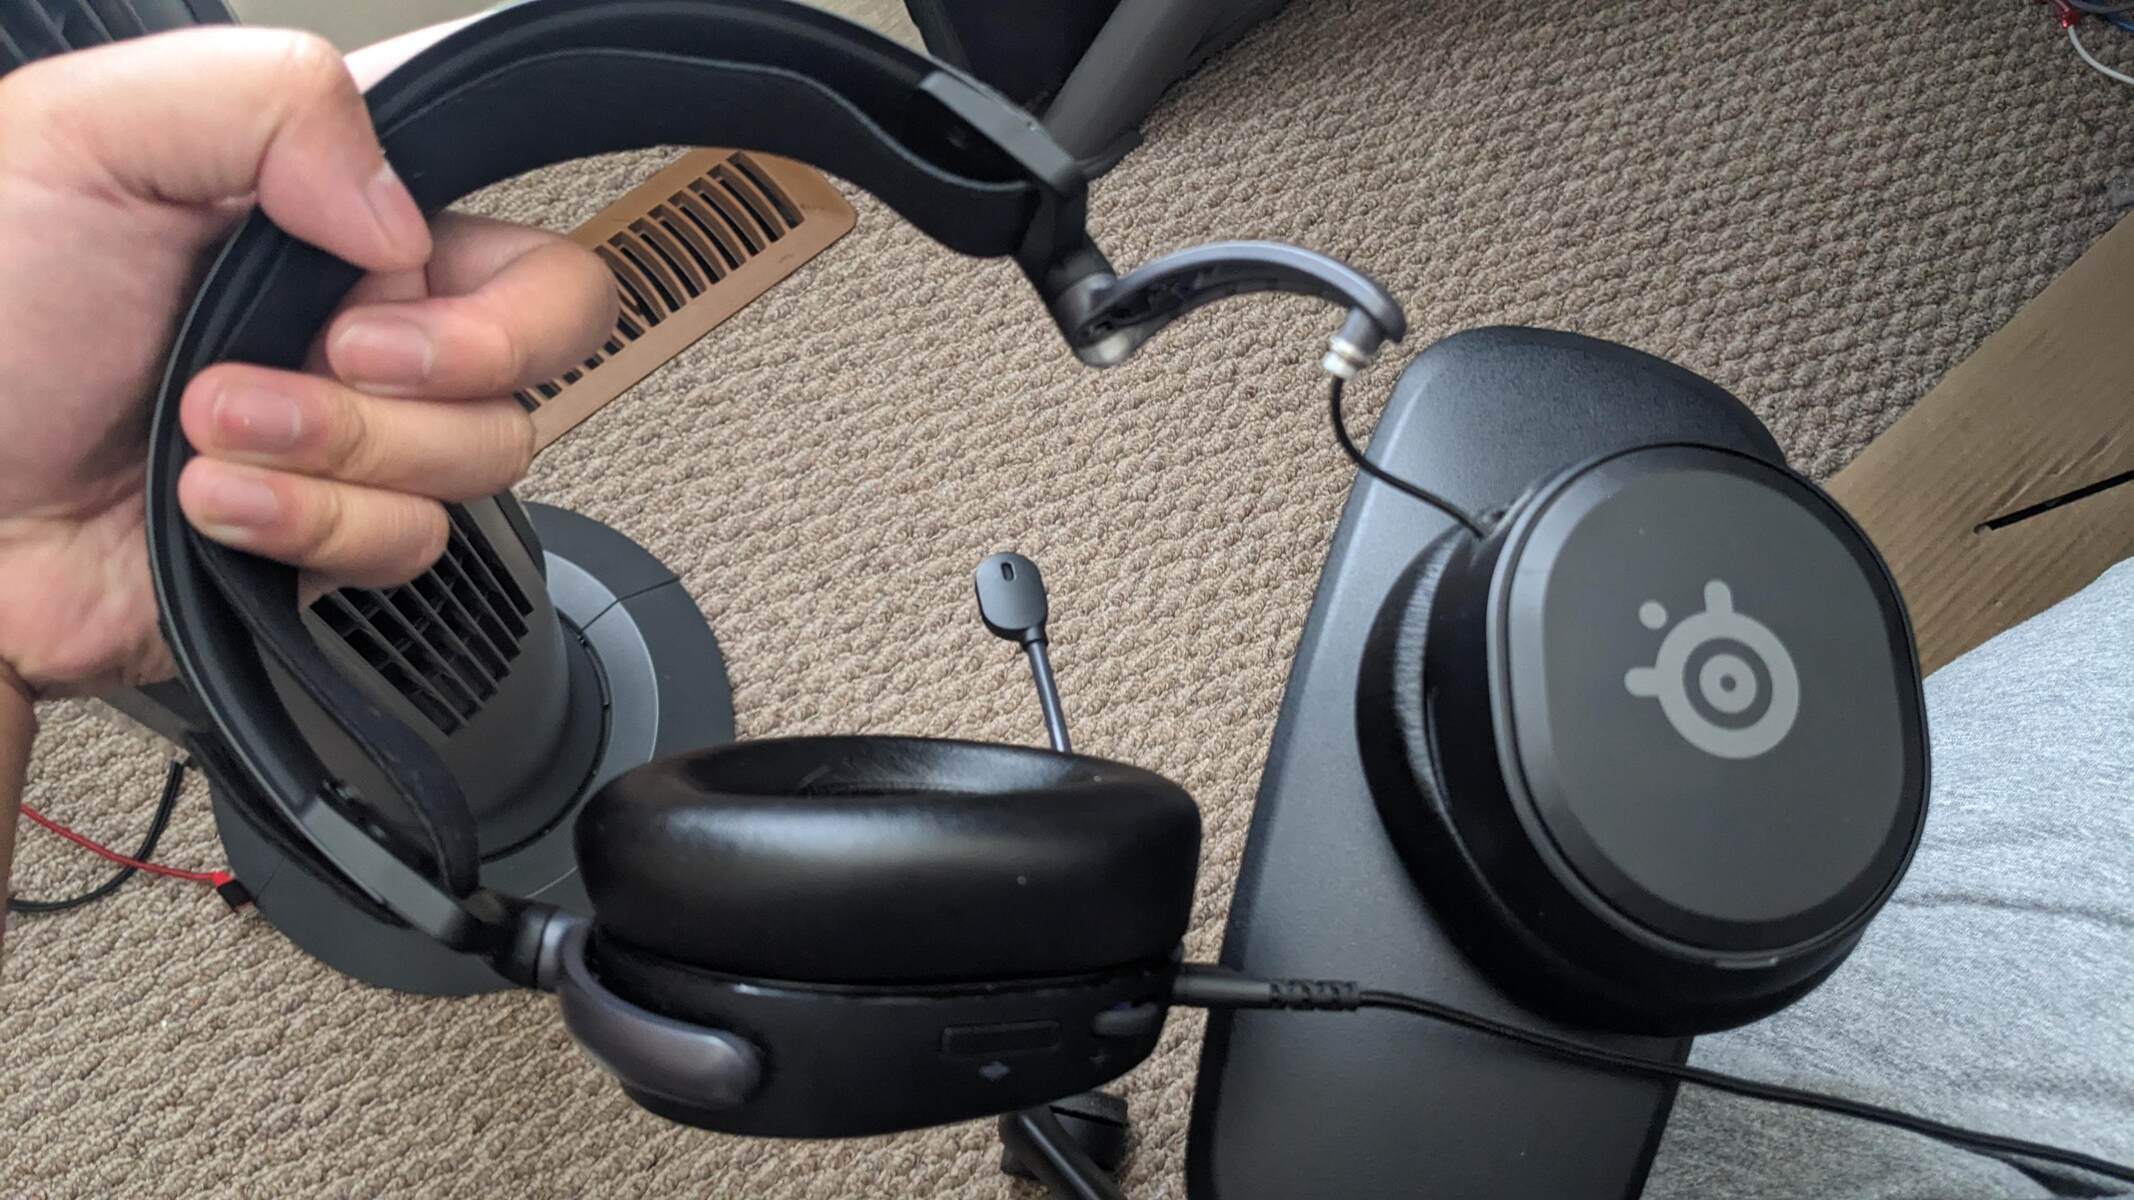 Why Do My Gaming Headset Breaks